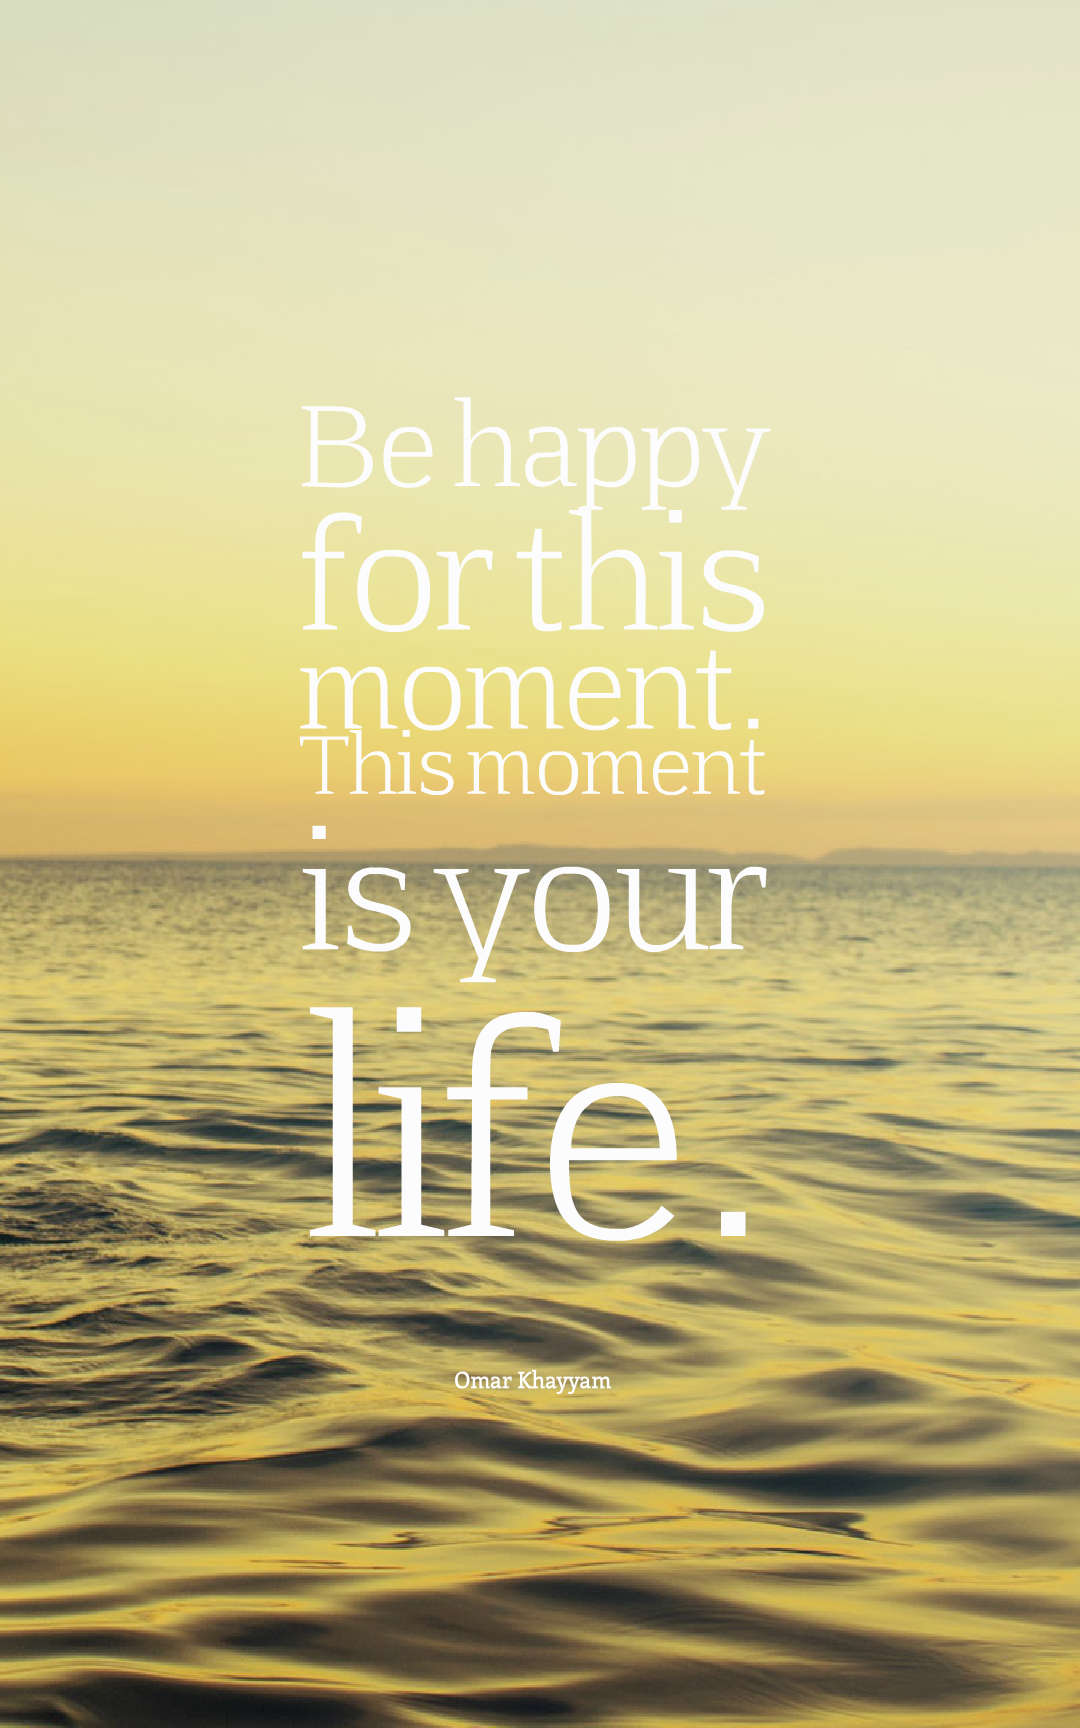 Be happy for this moment. This moment is your life.